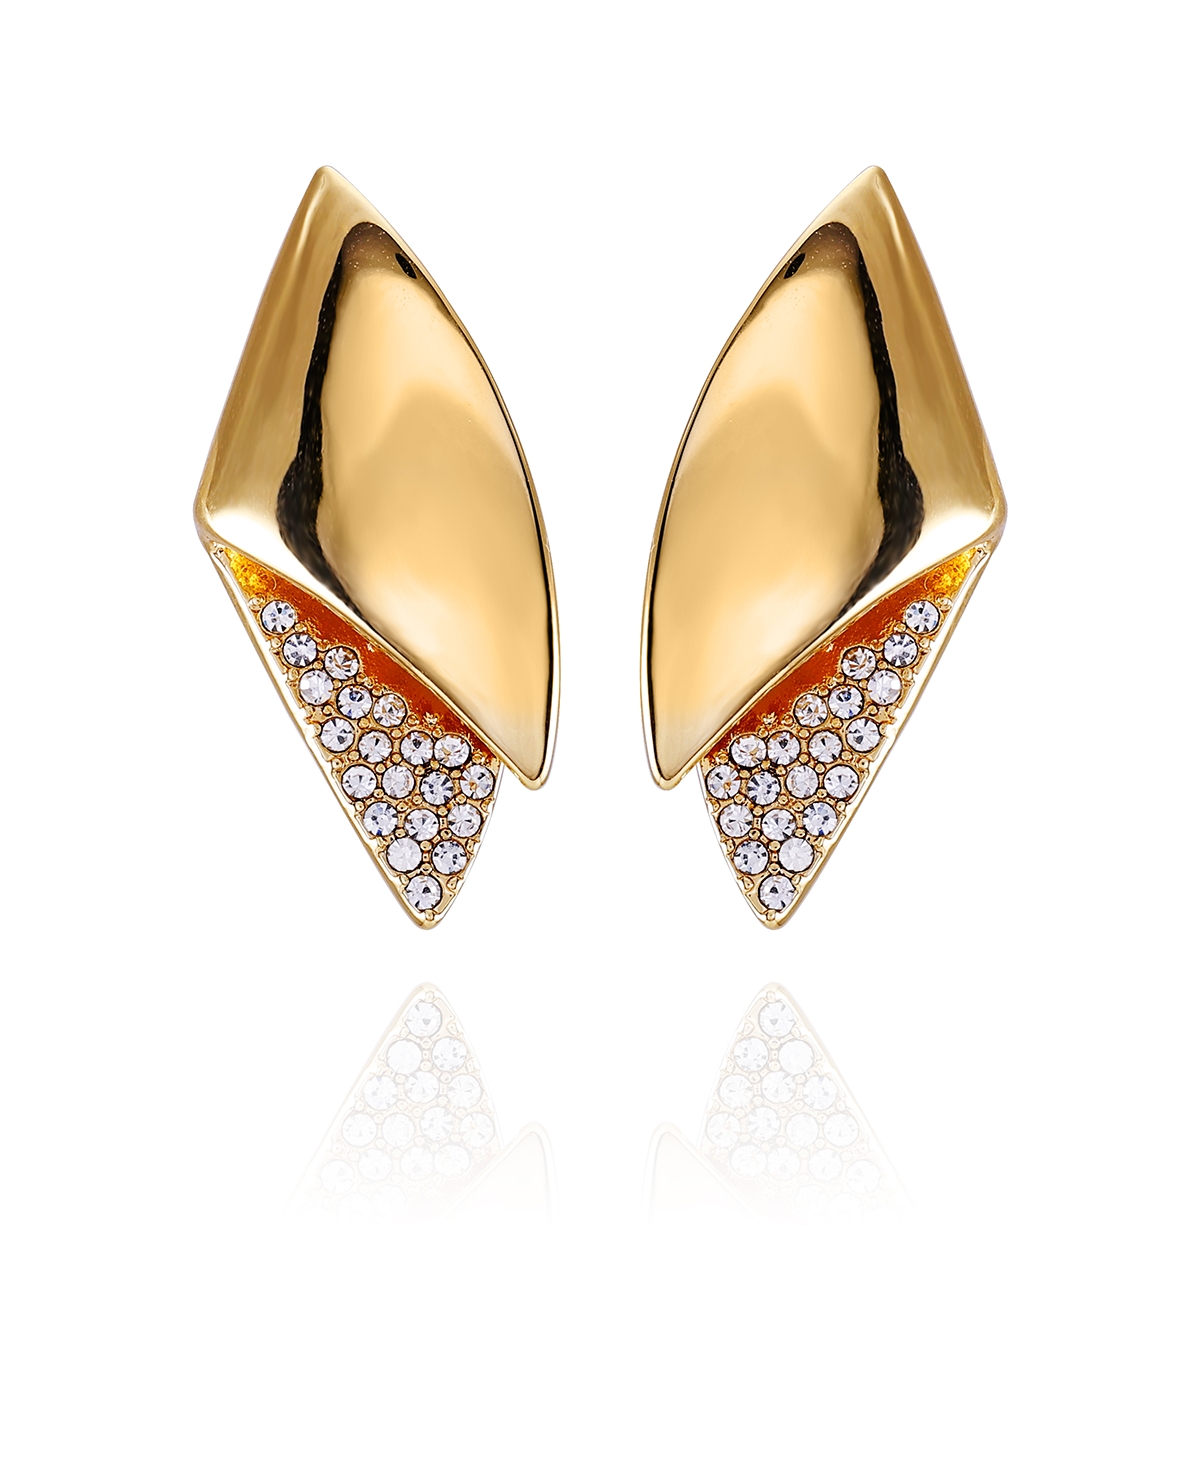 Vince Camuto Gold-tone Stud Statement Earrings